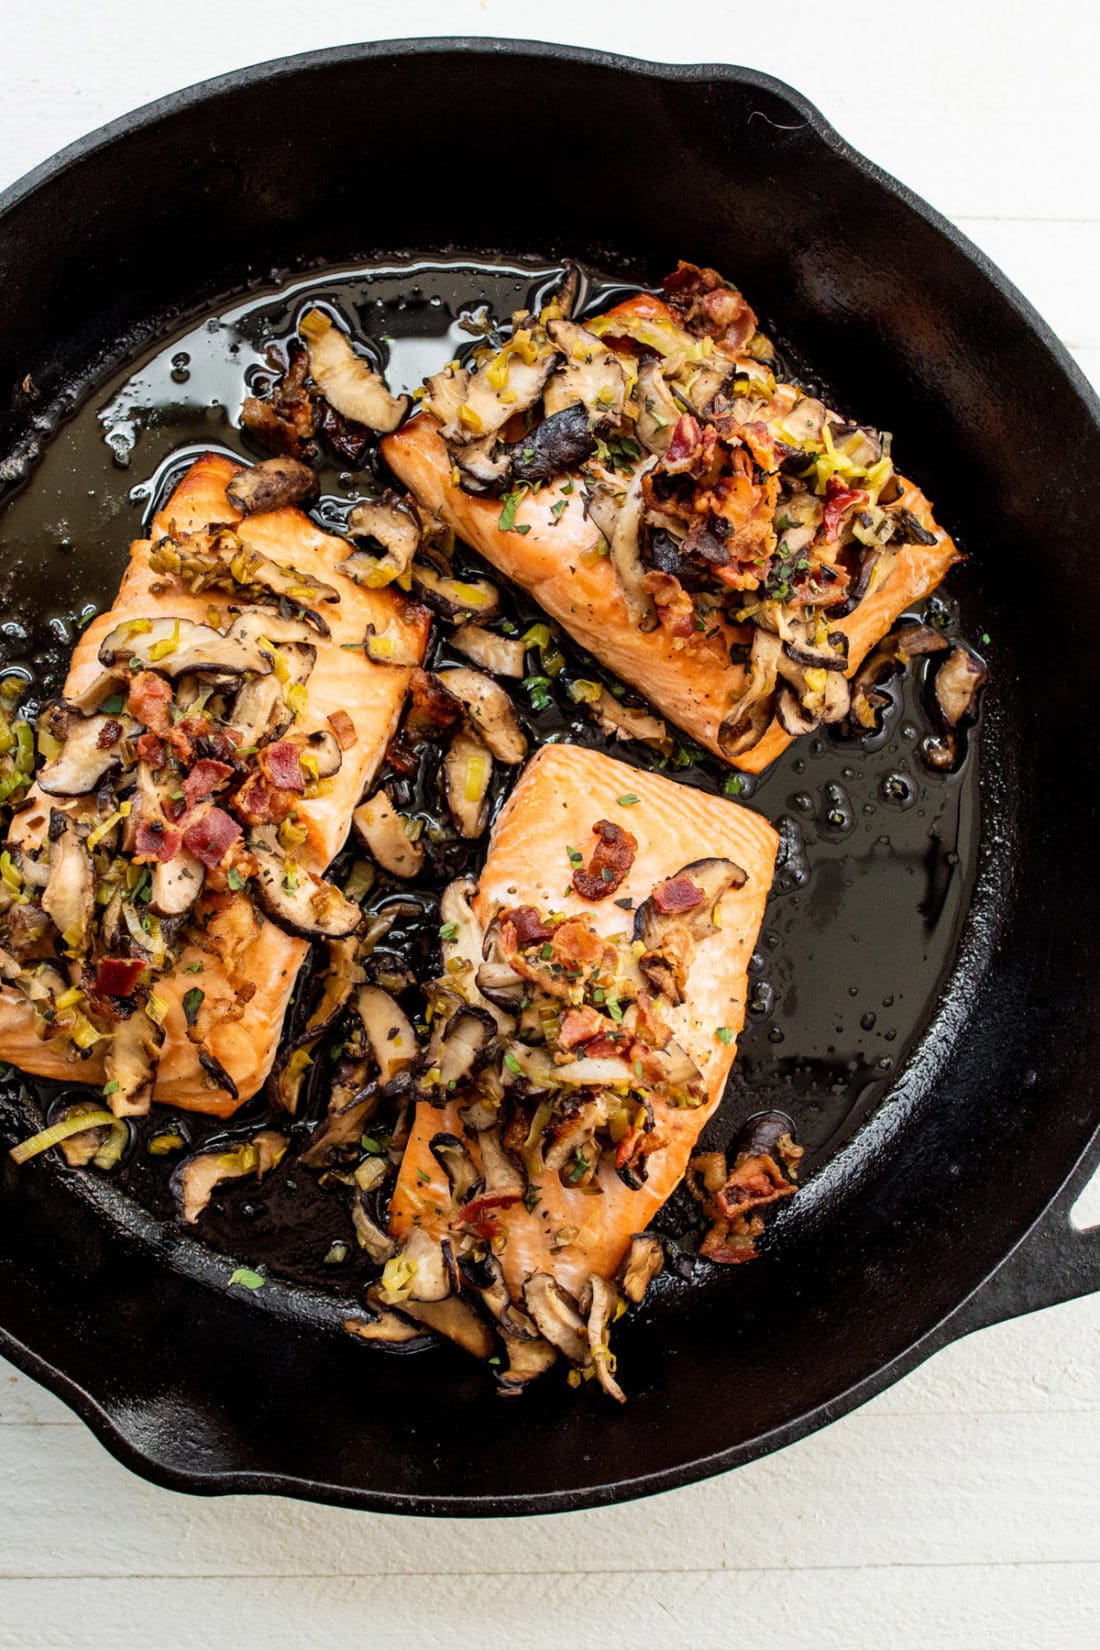 Orange Salmon with Leeks and Mushrooms in a skillet.